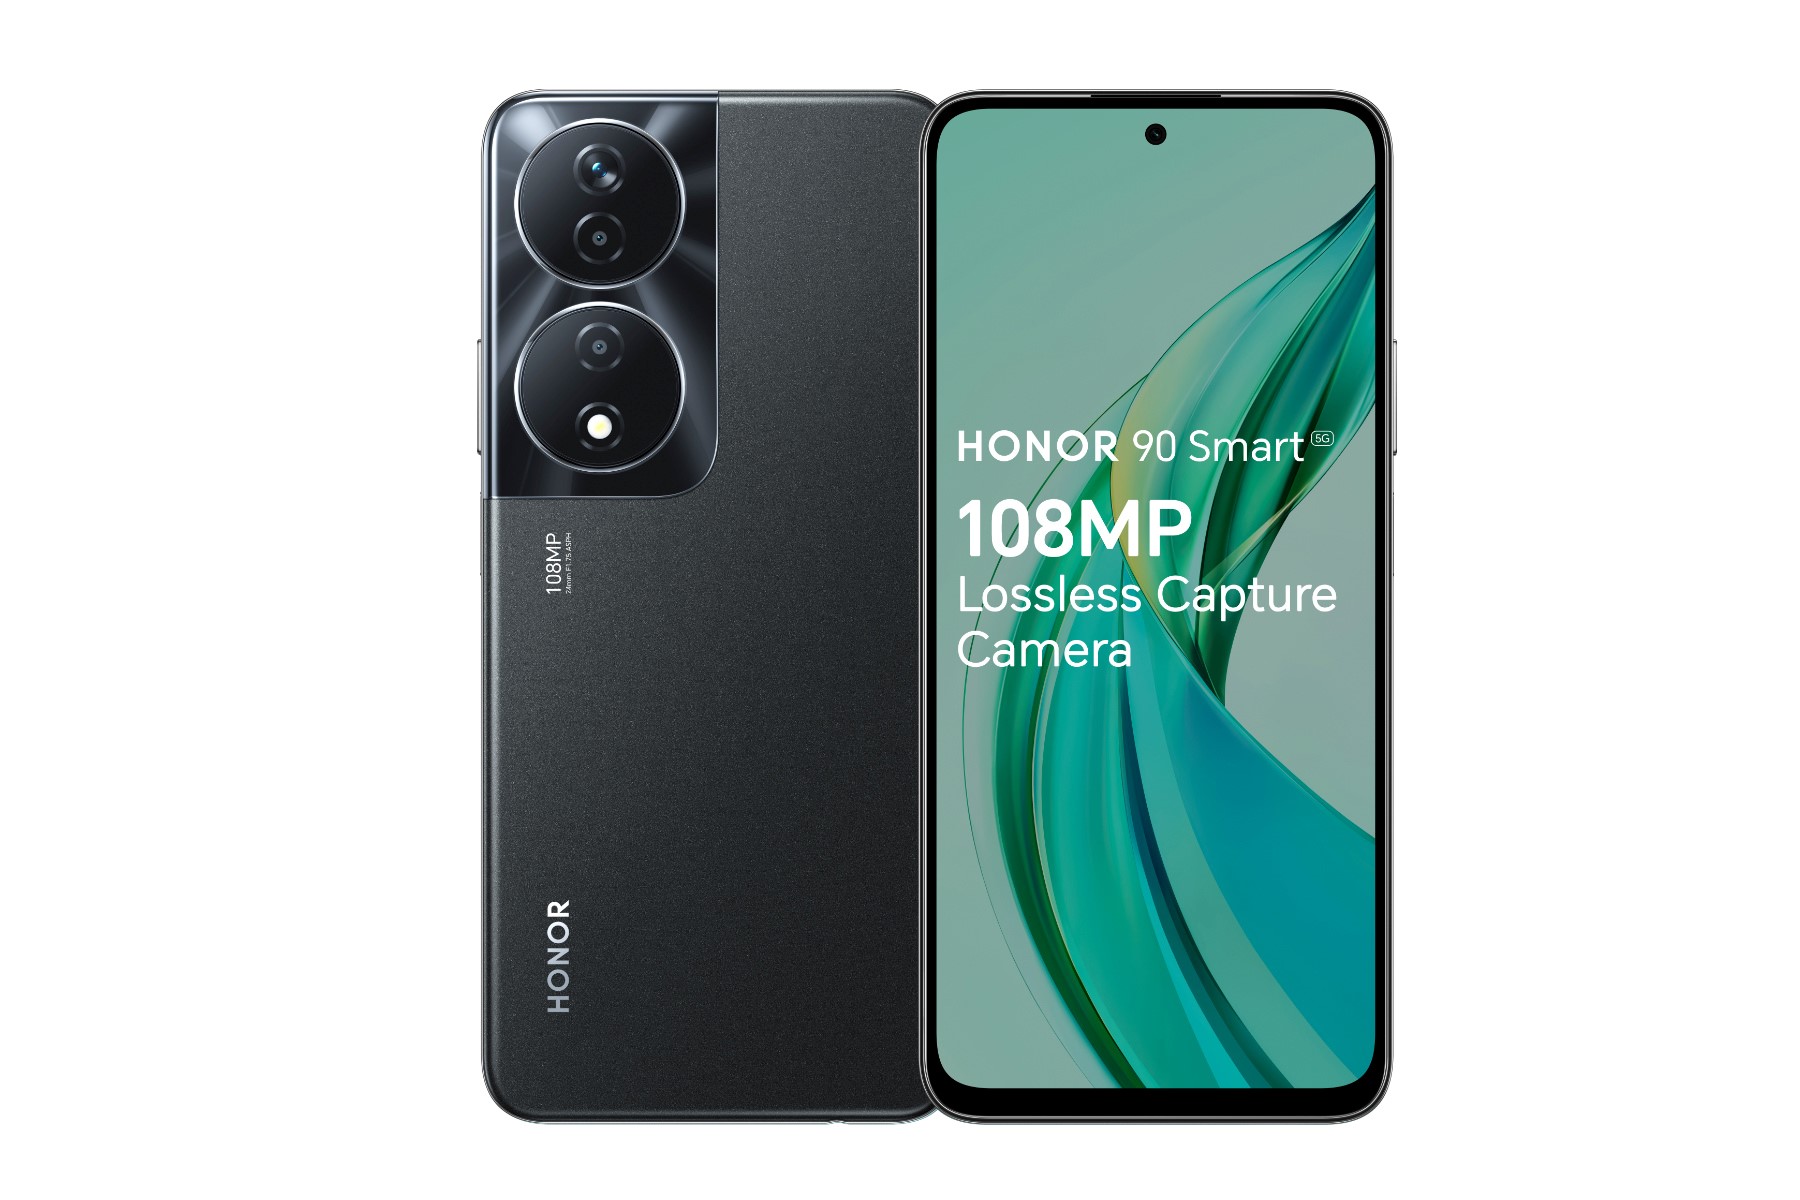 illustrative image of the Honor 90 Smart 5G smartphone from the rear and the front